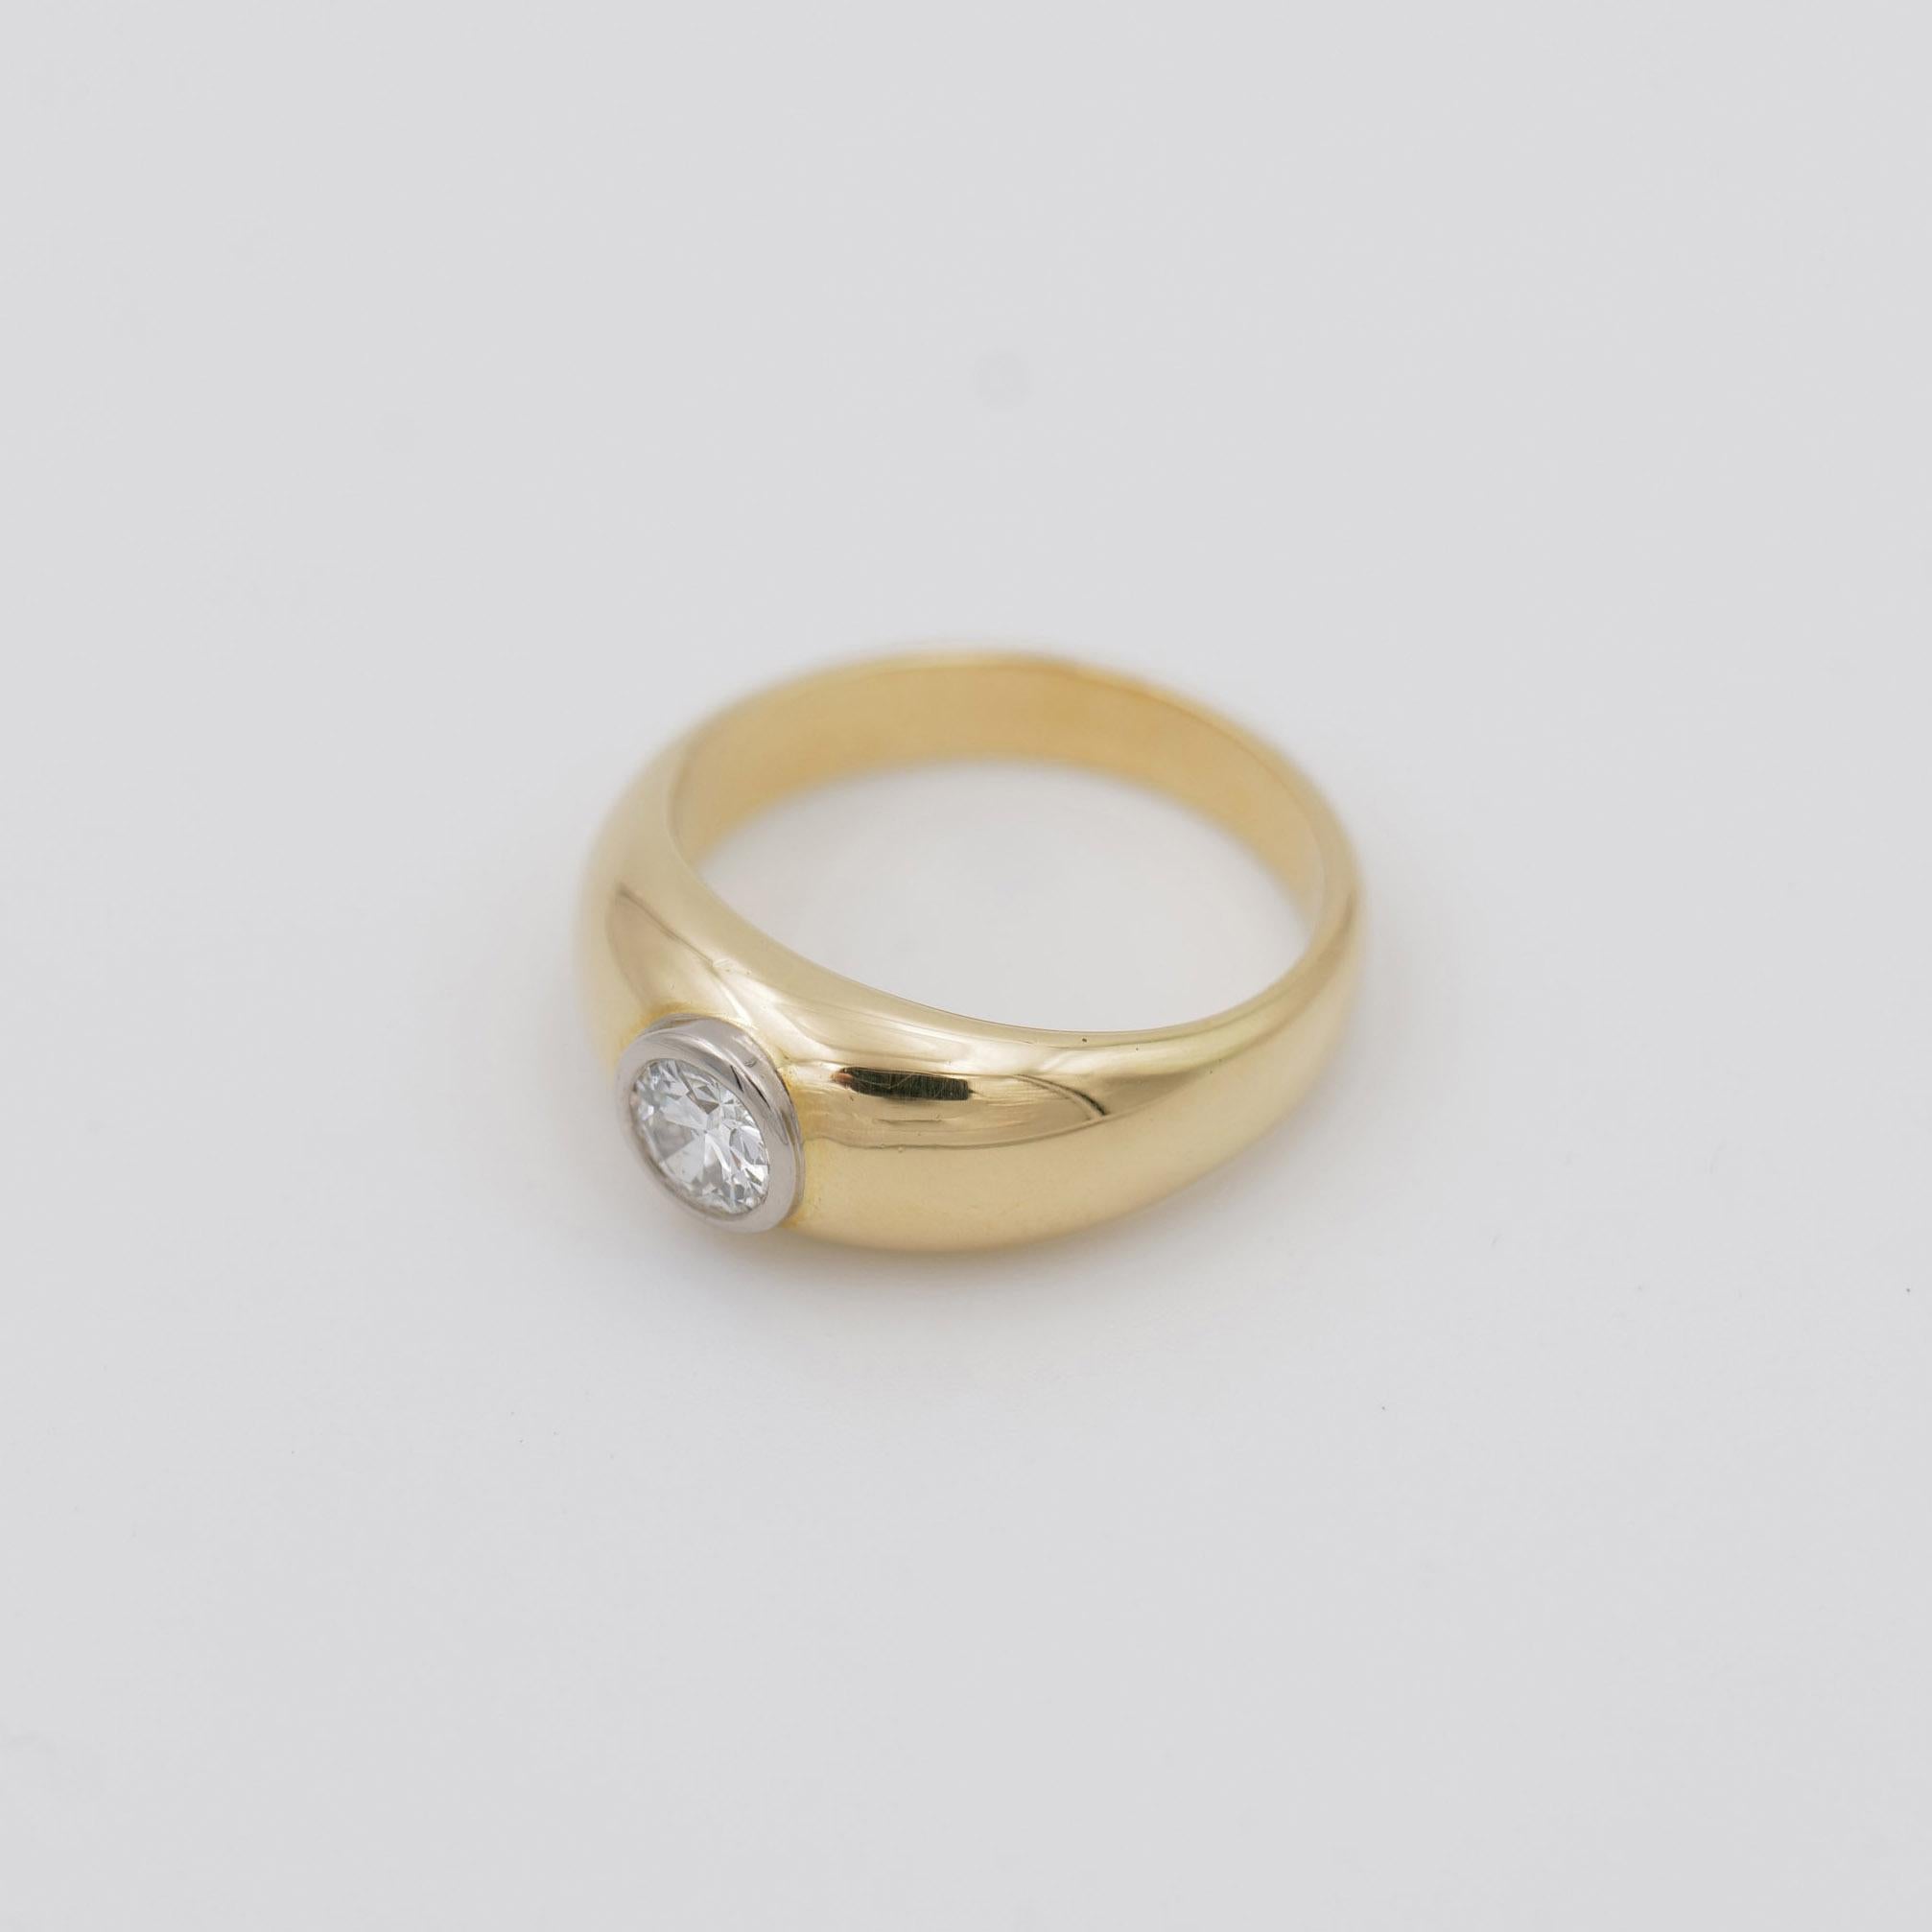 German Band ring in yellow gold with brilliant-cut diamond For Sale